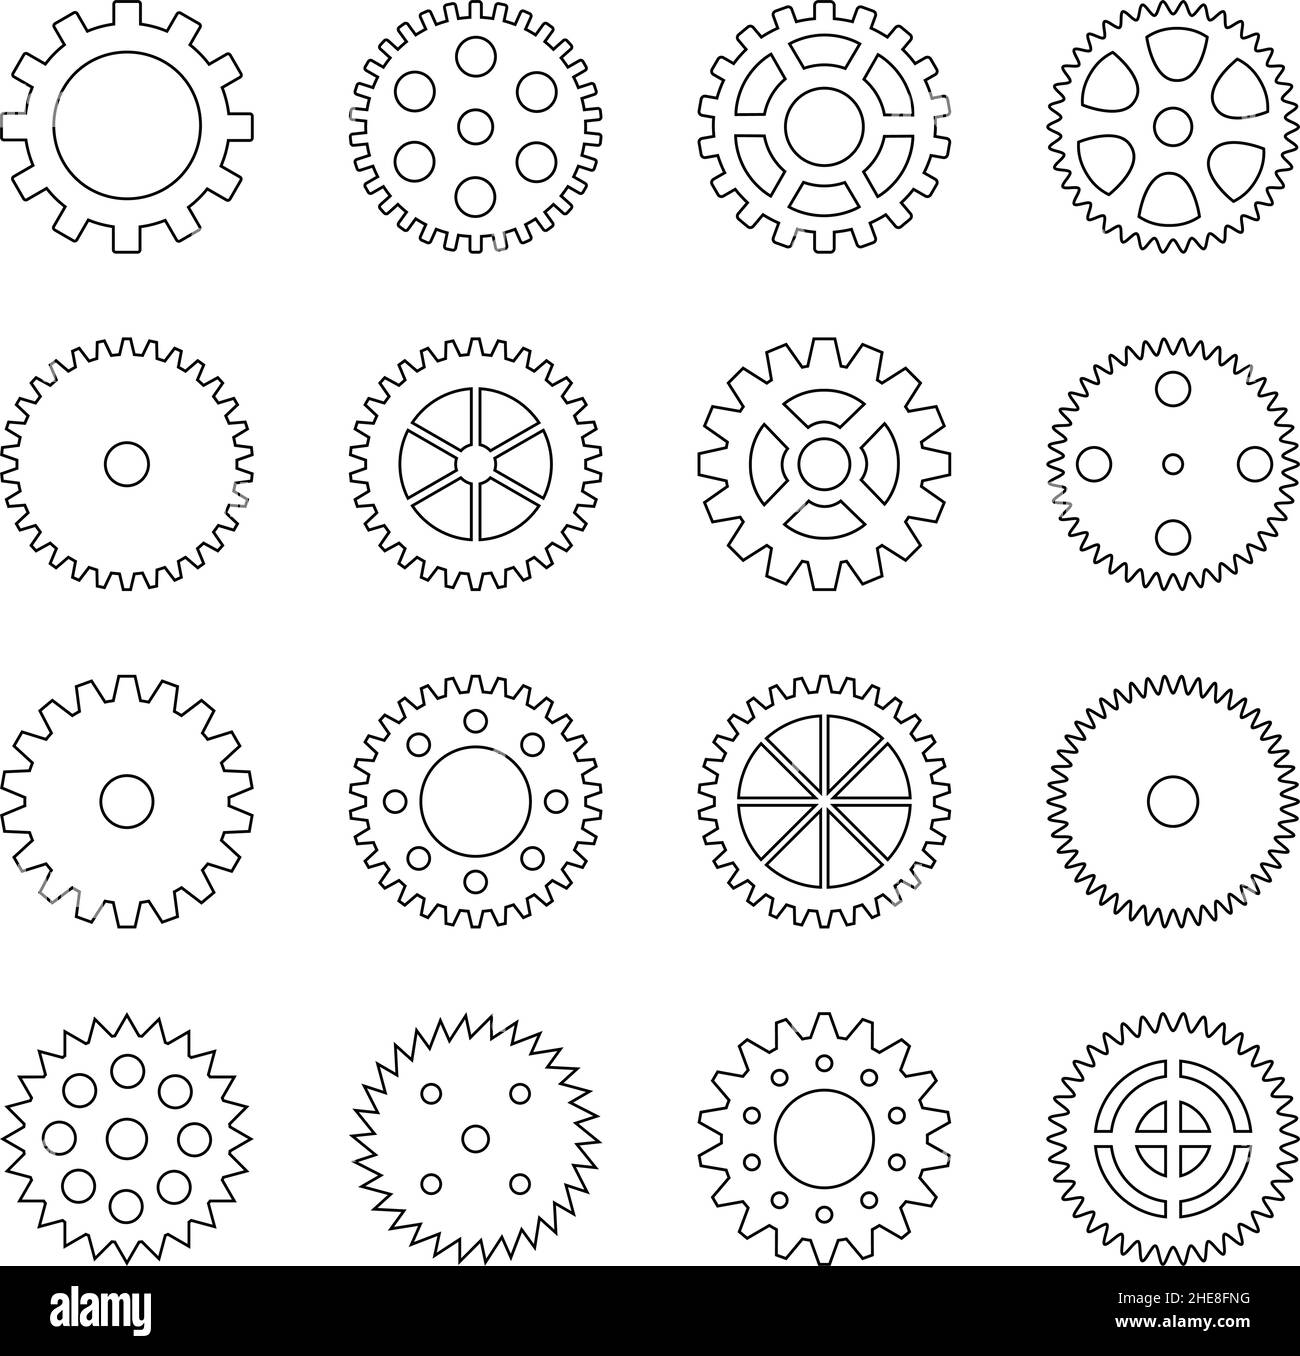 Set of outlines of gear wheels, vector illustration Stock Vector